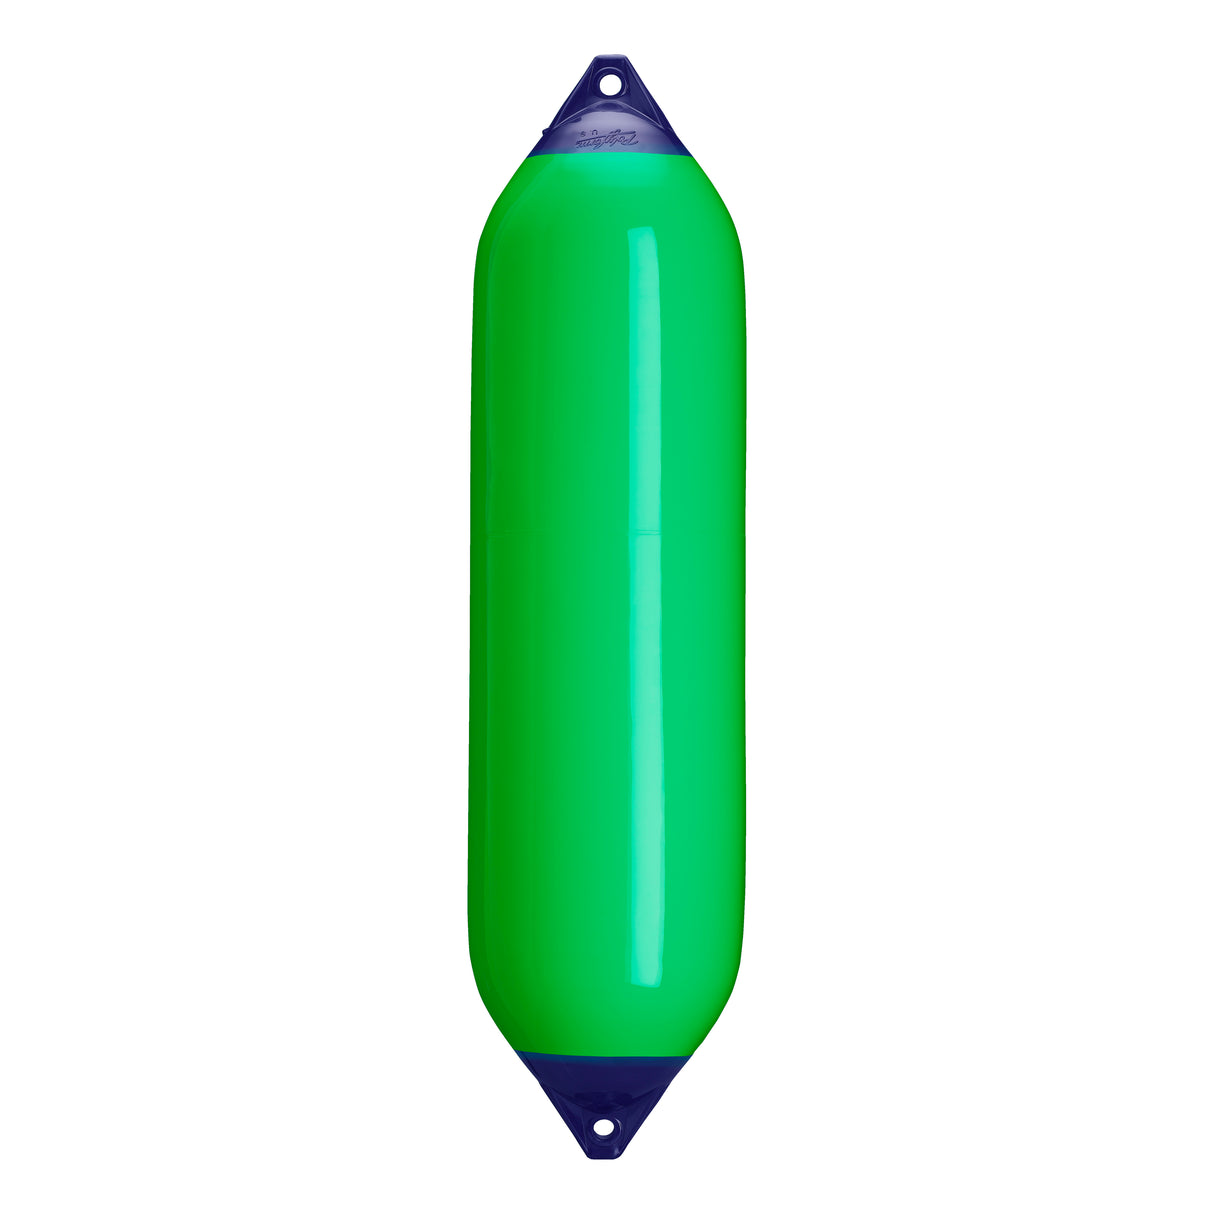 Green boat fender with Navy-Top, Polyform F-8 